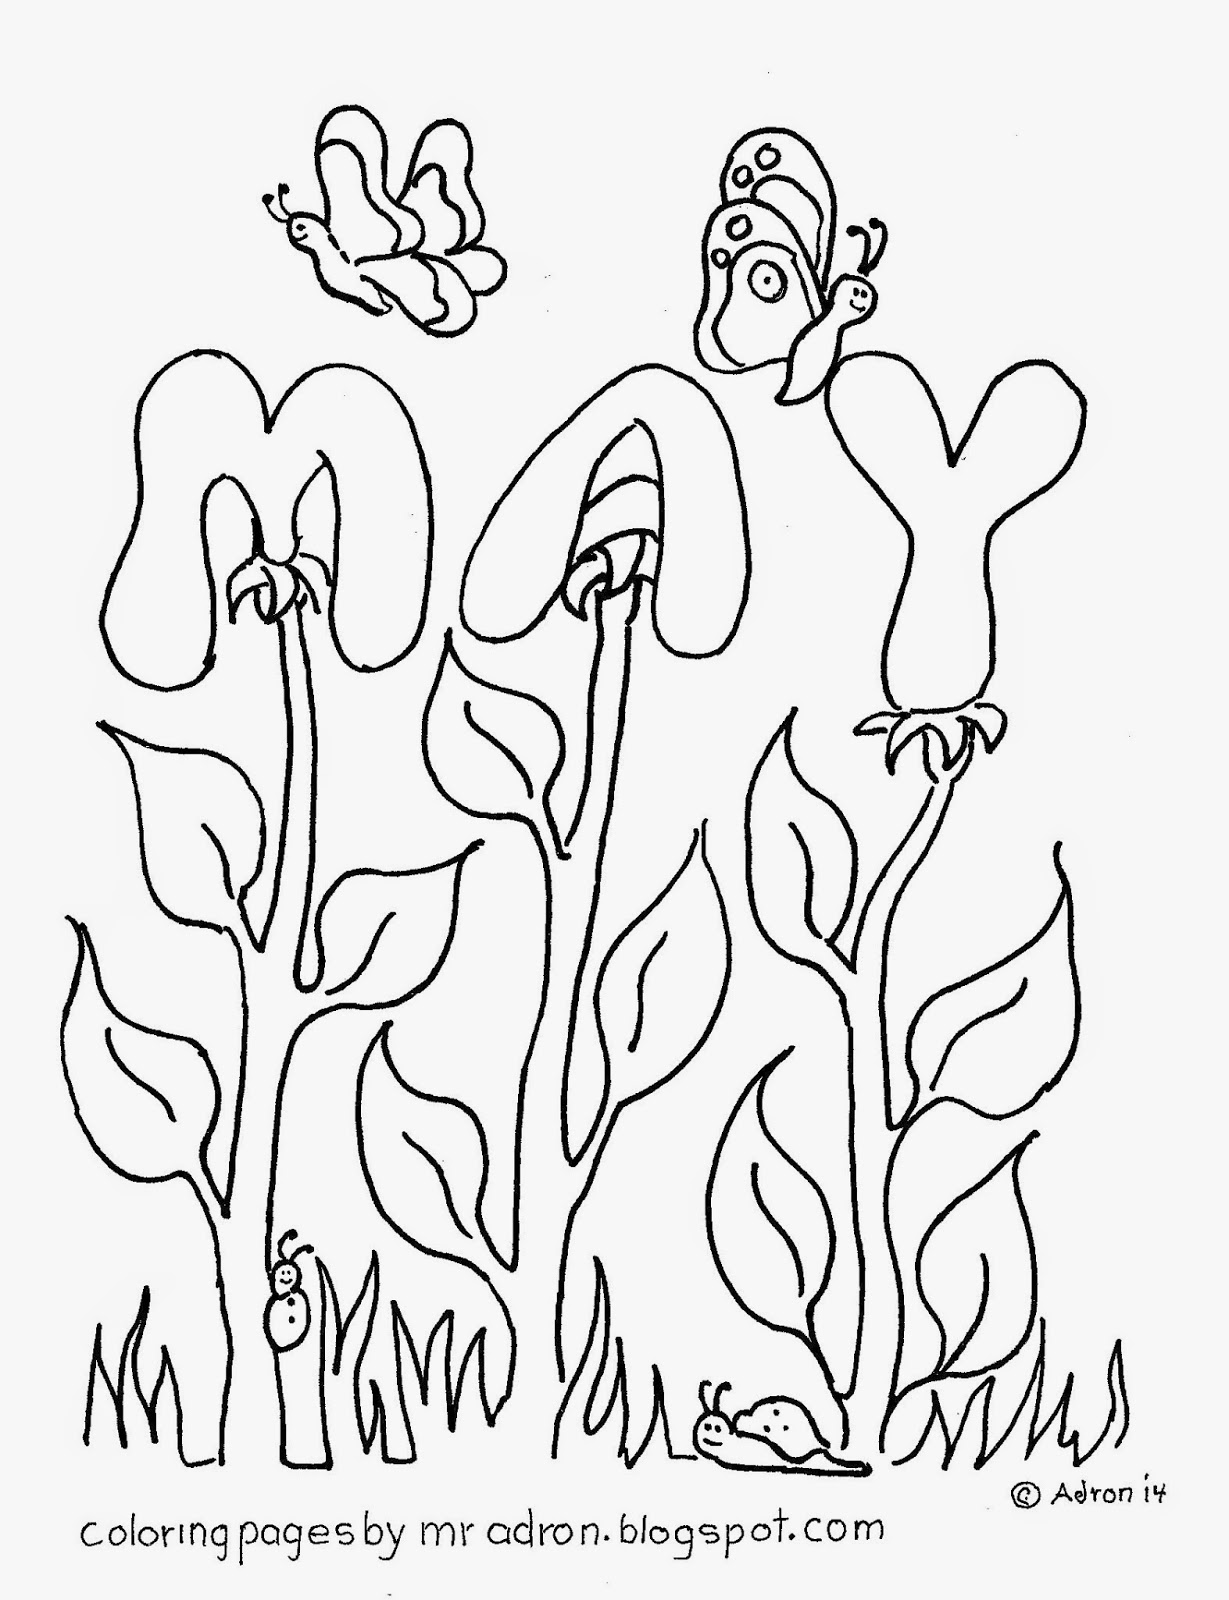 Free May coloring pages to print for kids Download print and color